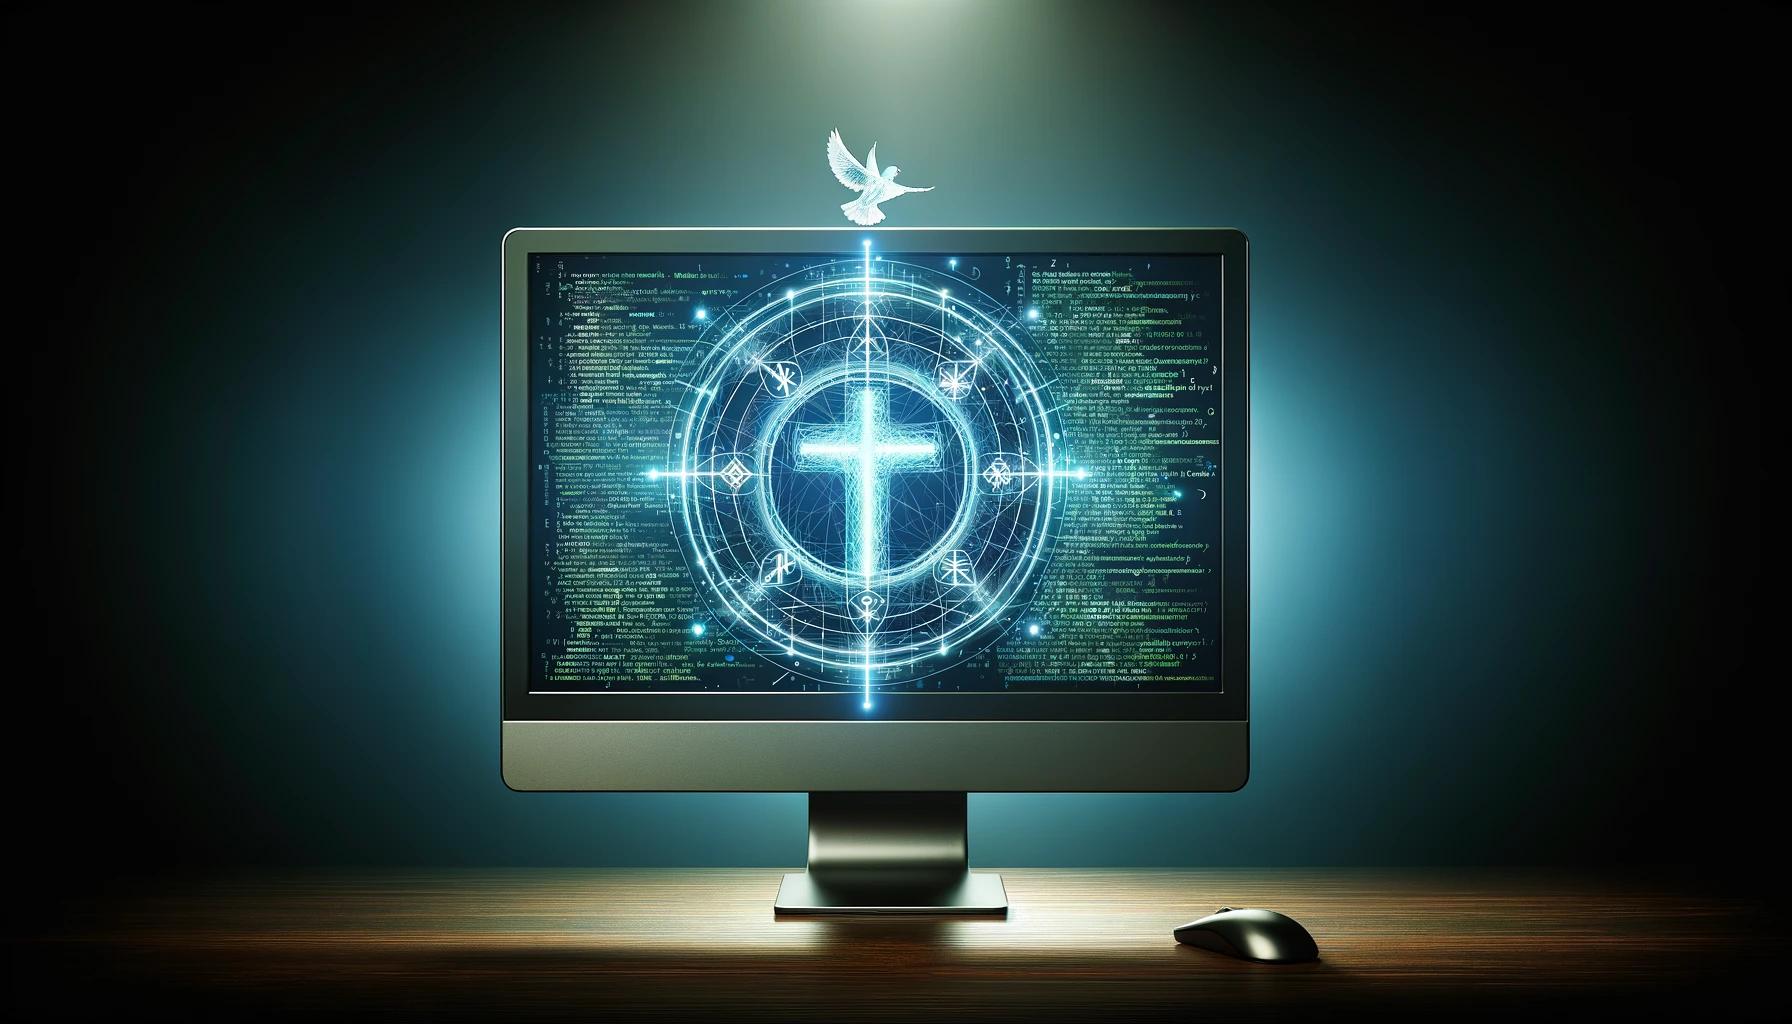 Placeholder image of a computer screen displaying code with symbols of faith like a cross or a dove